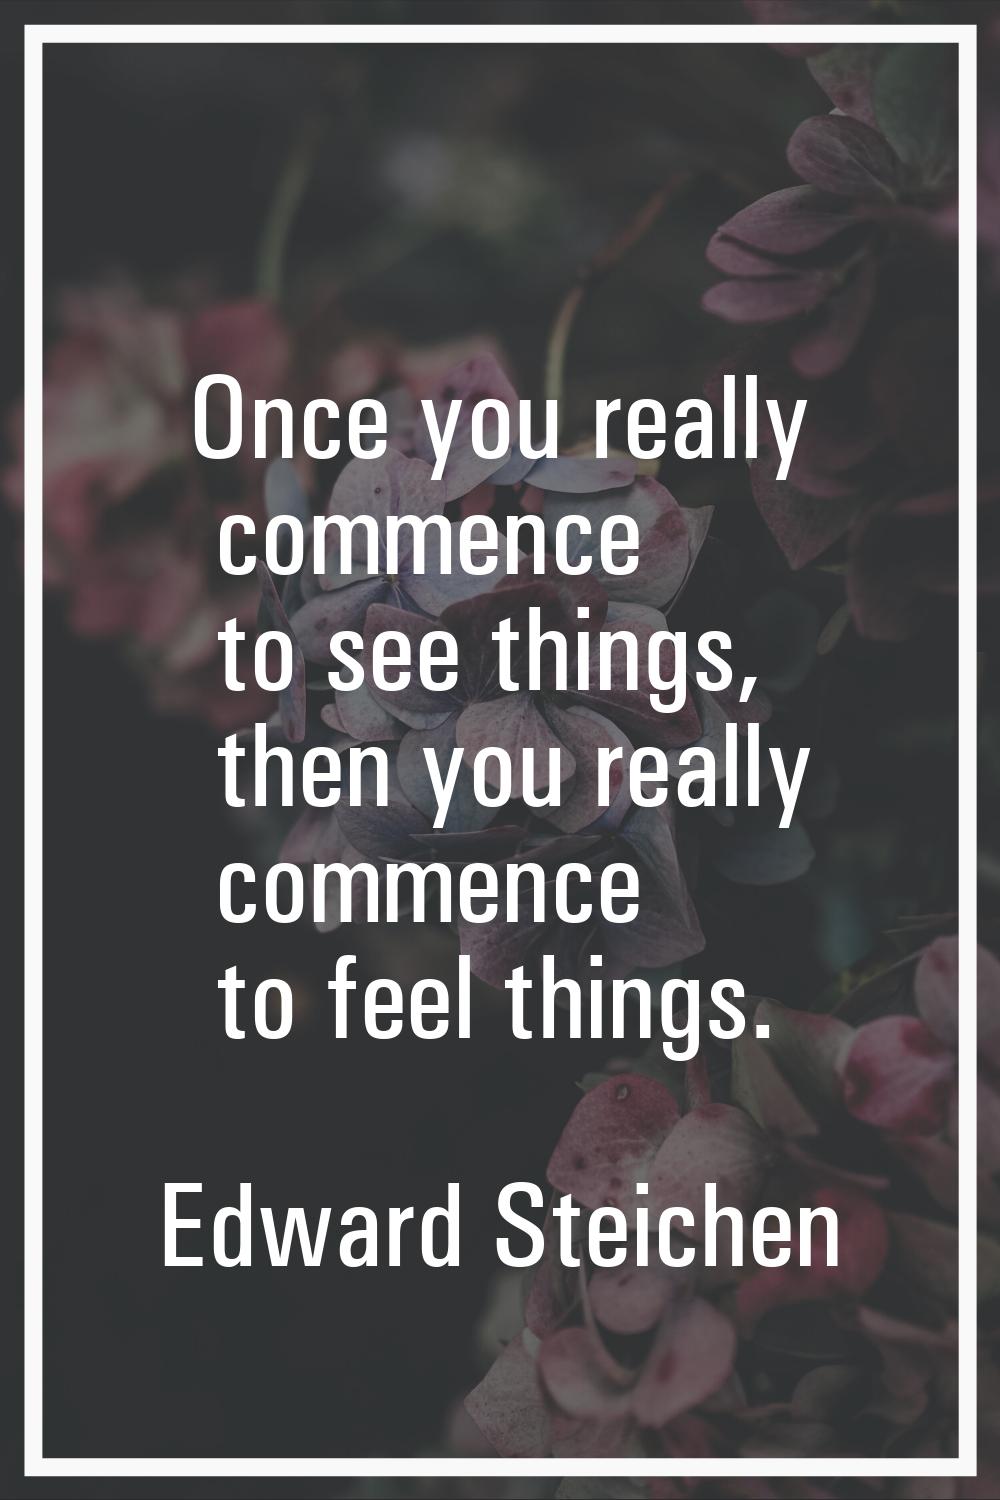 Once you really commence to see things, then you really commence to feel things.